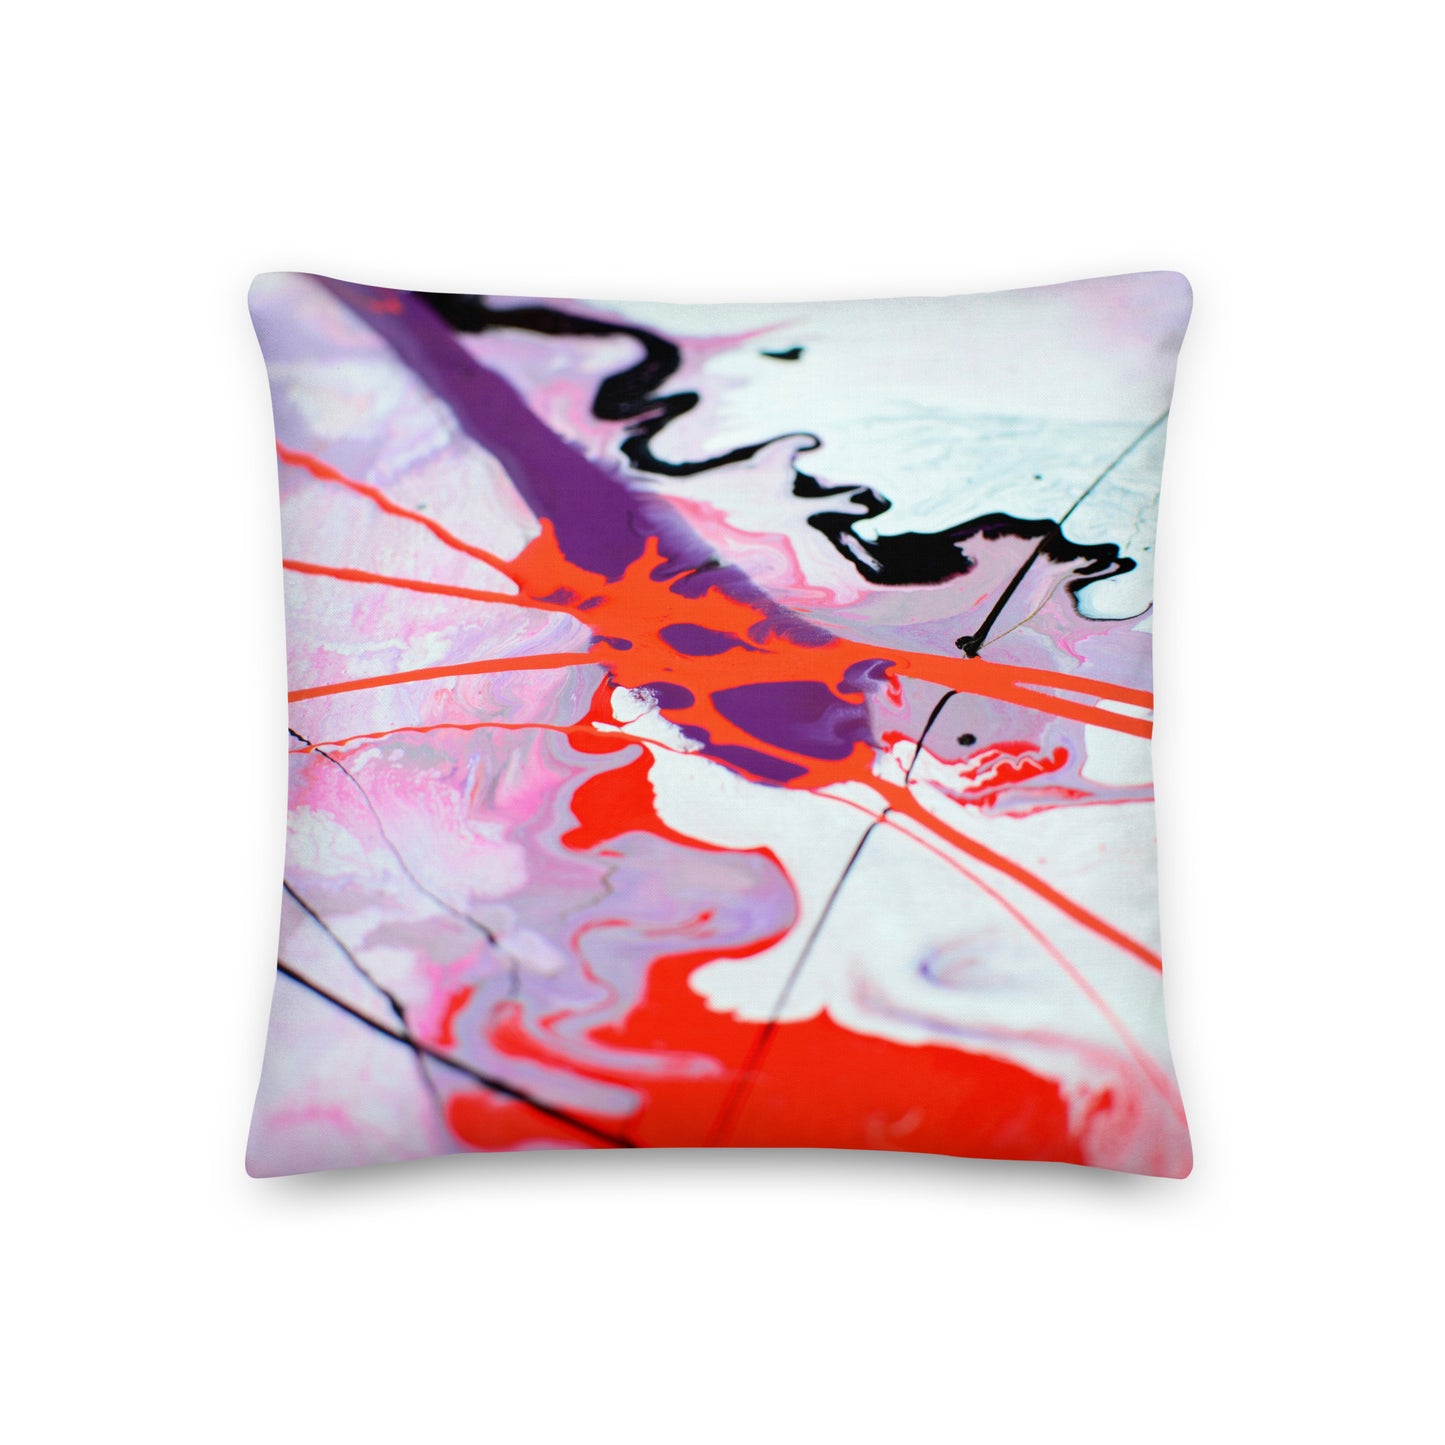 Premium Pillow - Pink and red design